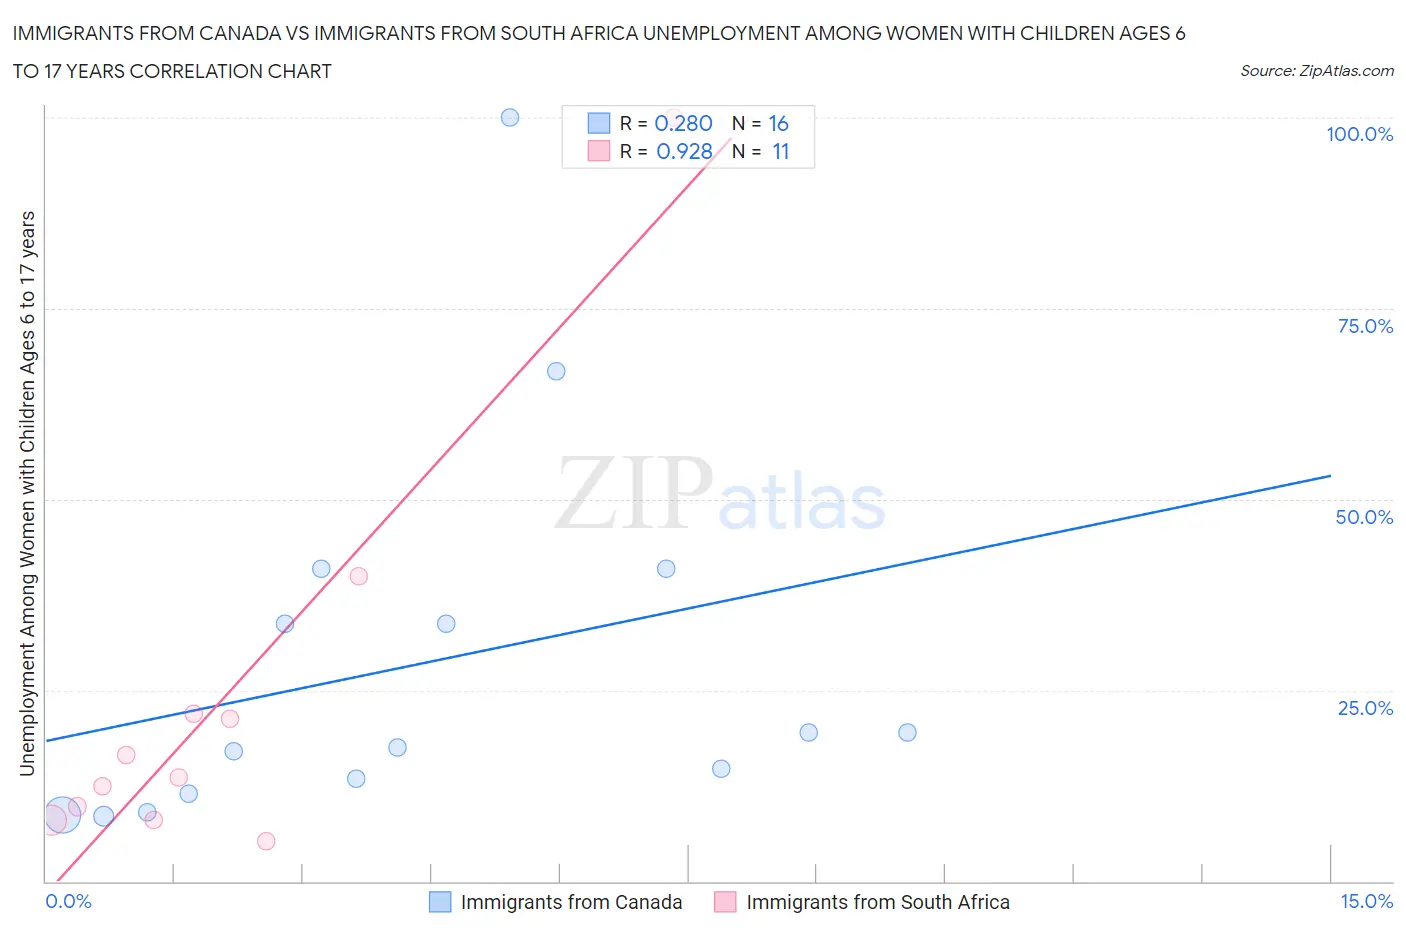 Immigrants from Canada vs Immigrants from South Africa Unemployment Among Women with Children Ages 6 to 17 years